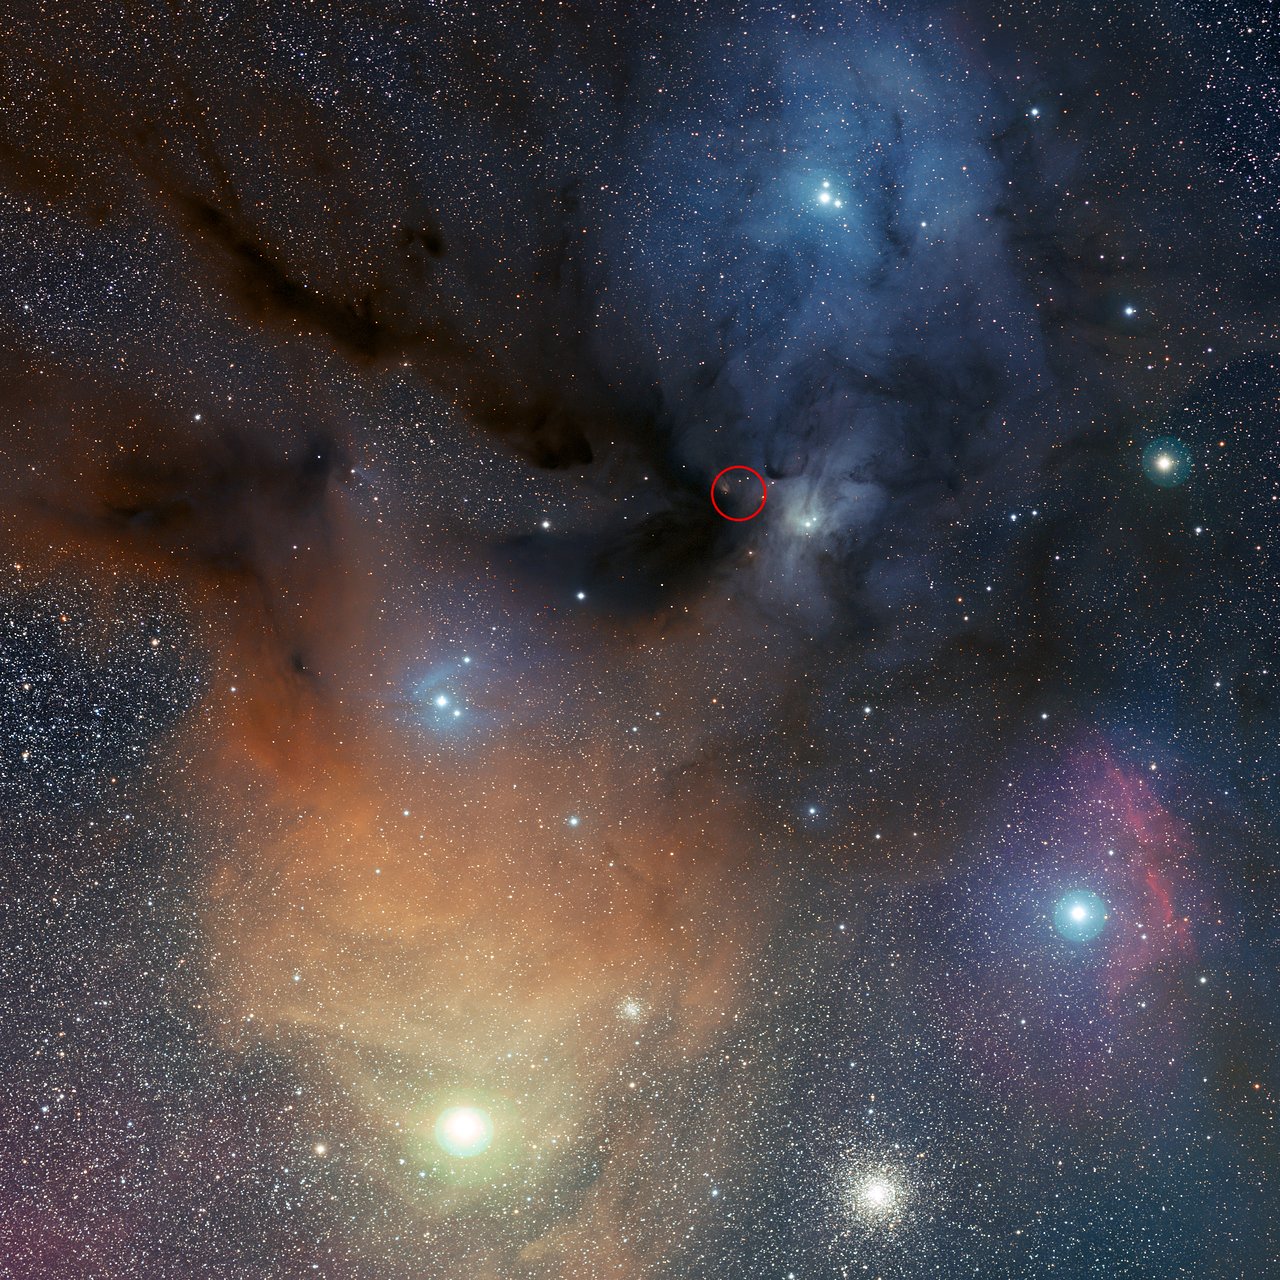 http://www.eso.org/public/archives/images/screen/eso1123a.jpg